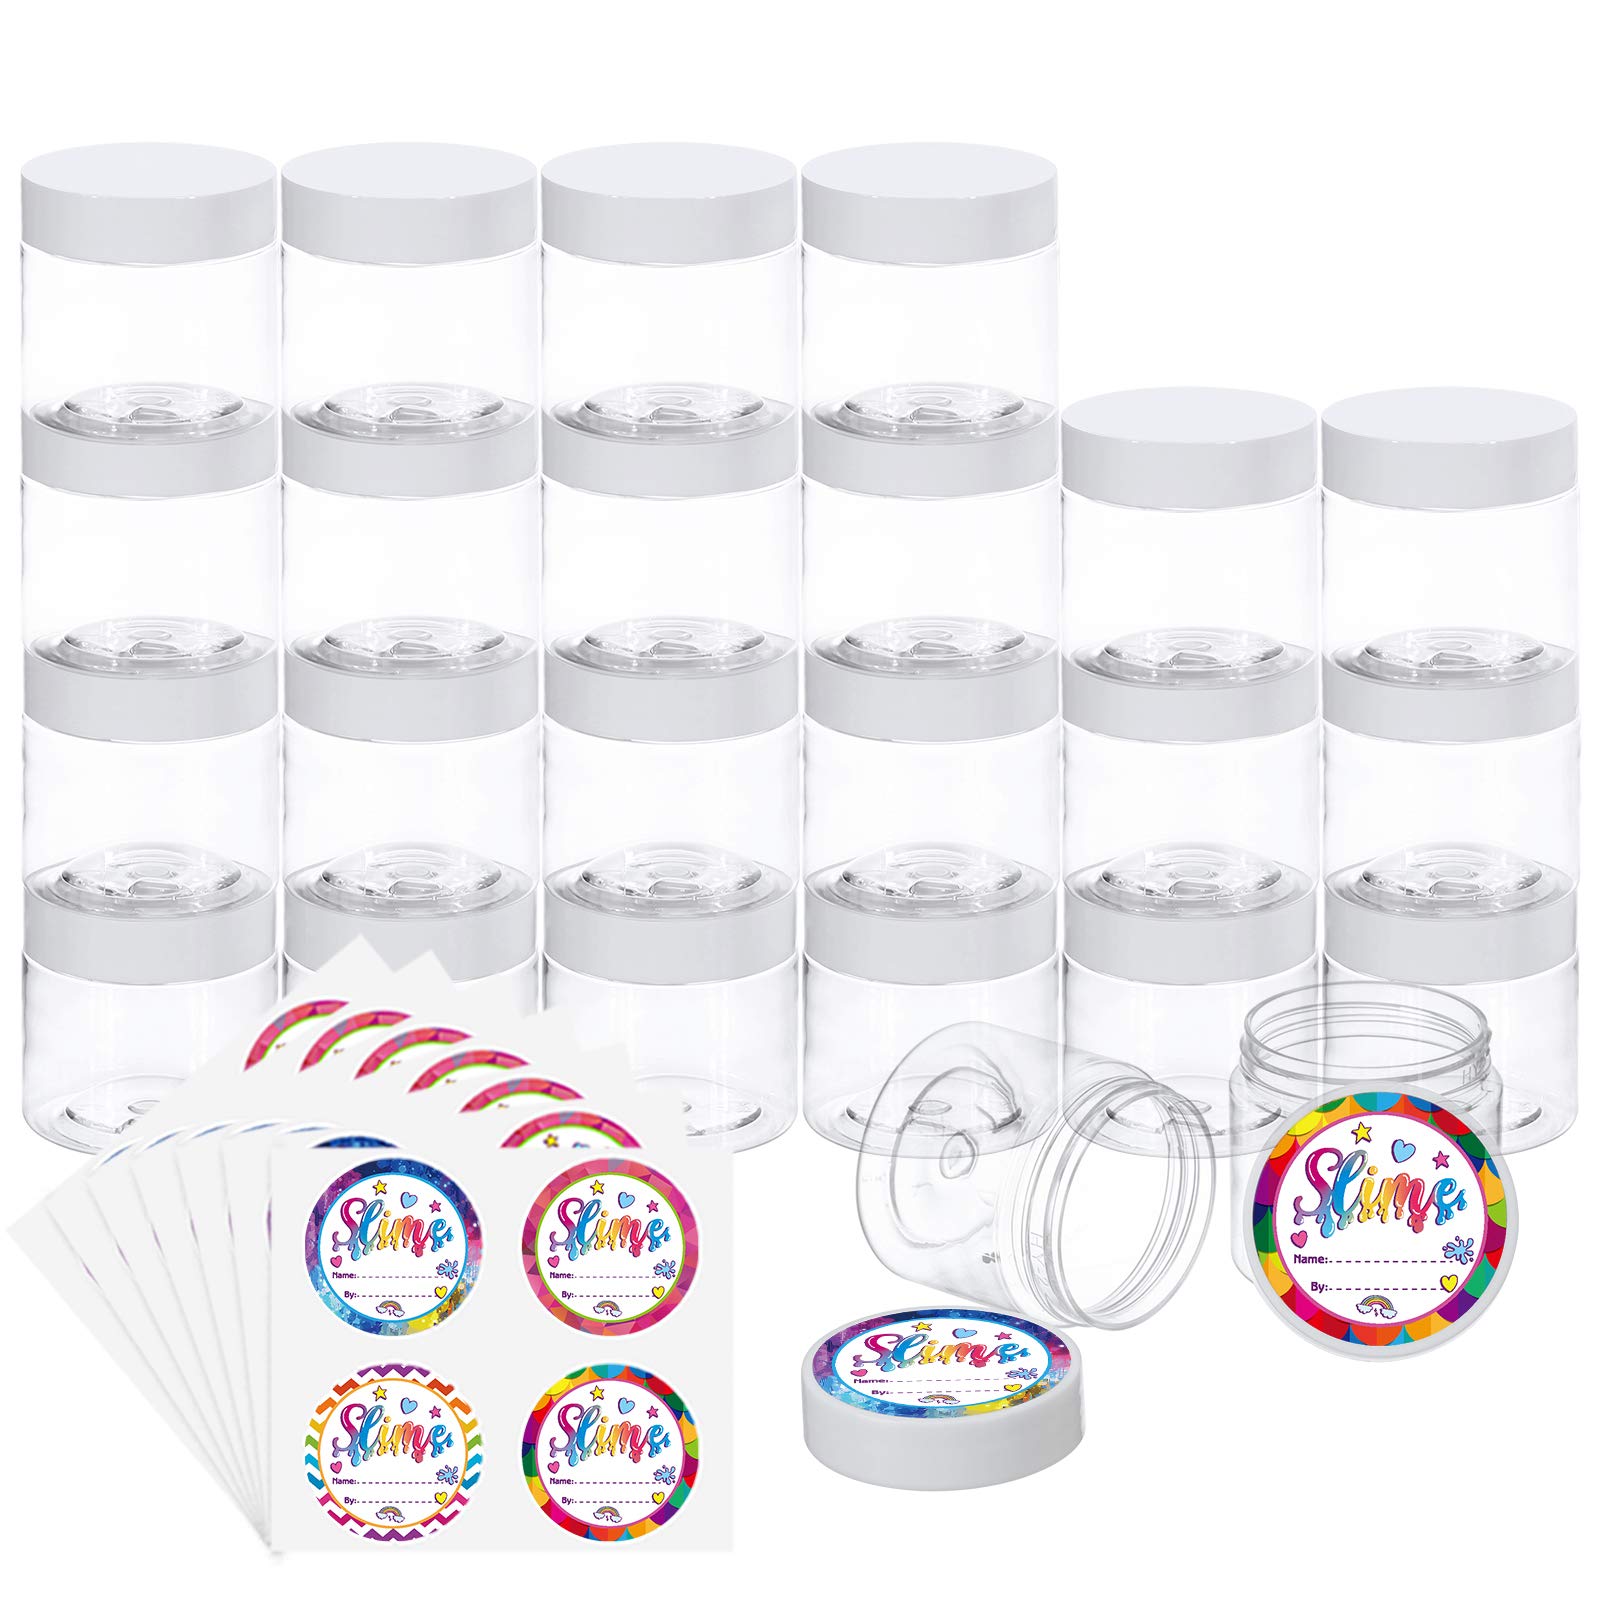 24 Pcs 8oz Slime Containers With Lids, Plastic Jars Containers For Slime  With White Water-Tight Lids And Stickers Mini Storage For DIY Slime Making,  C